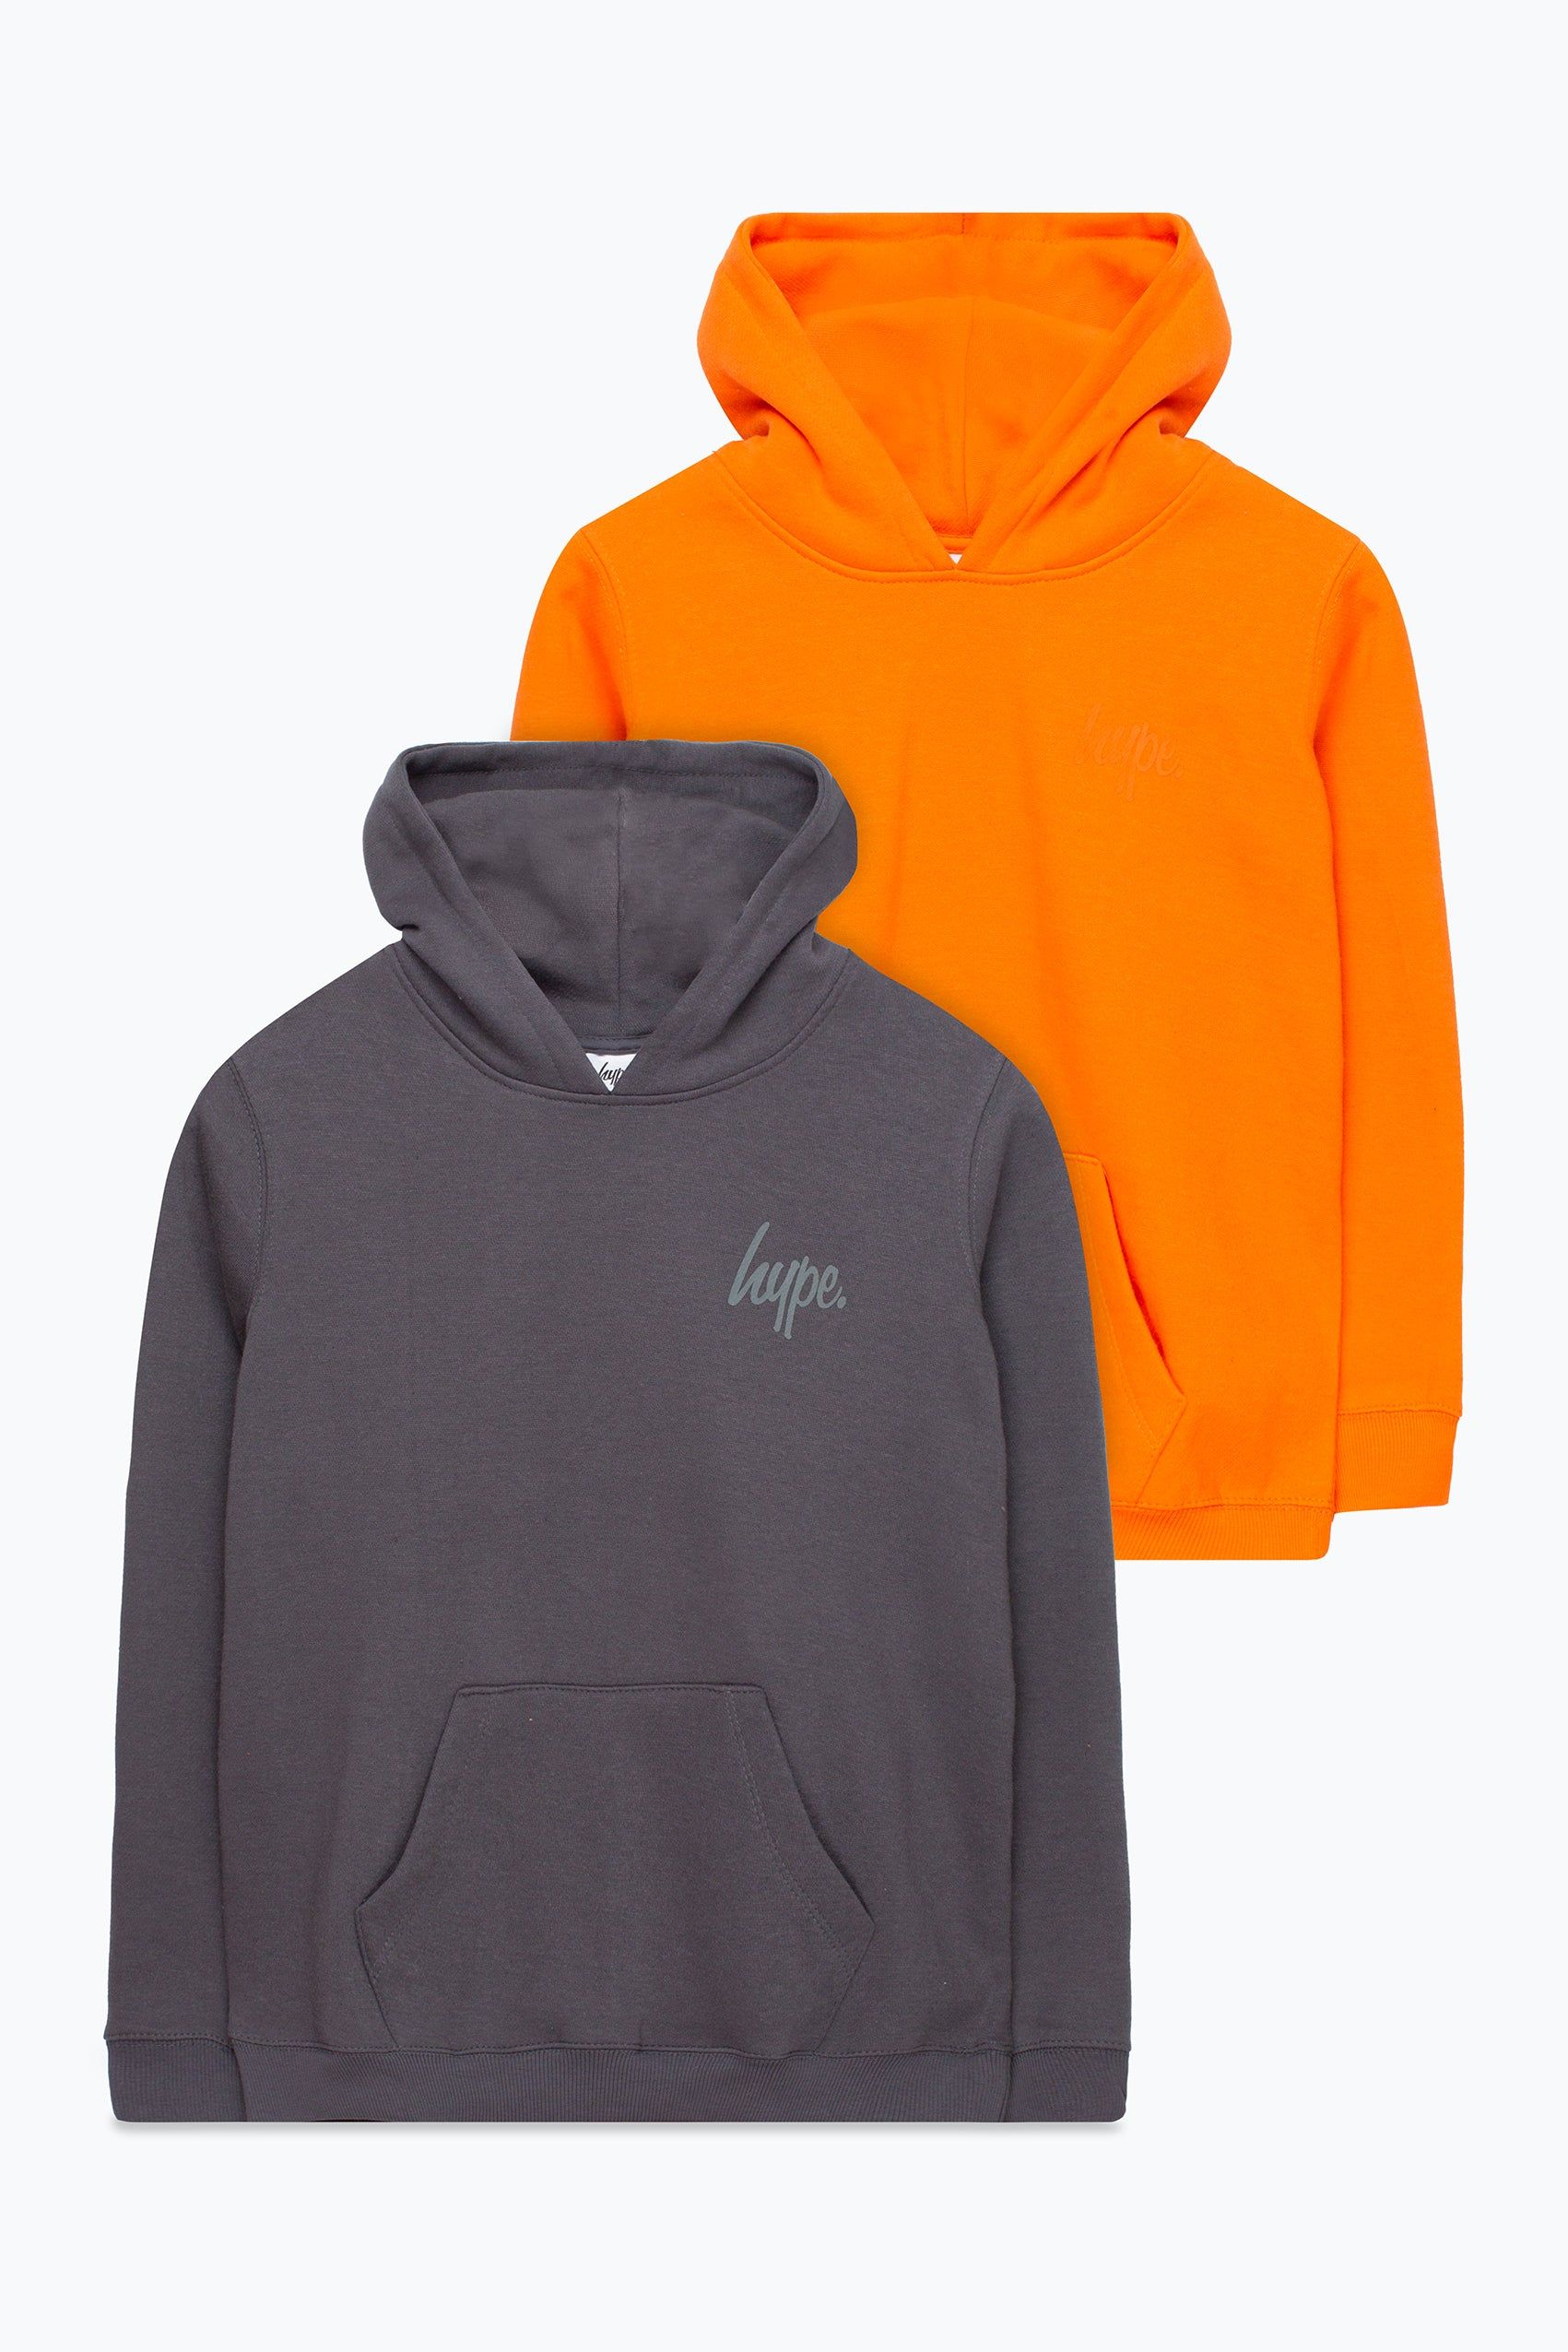 The HYPE. Kids Pullover Hoodie set is your new go-to jumper. Featuring supreme comfort with a fixed hood, kangaroo pocket and fitted hem and cuffs. Designed in a unisex kids pullover shape paired with a genderless design. This is a two pack. Machine washable.